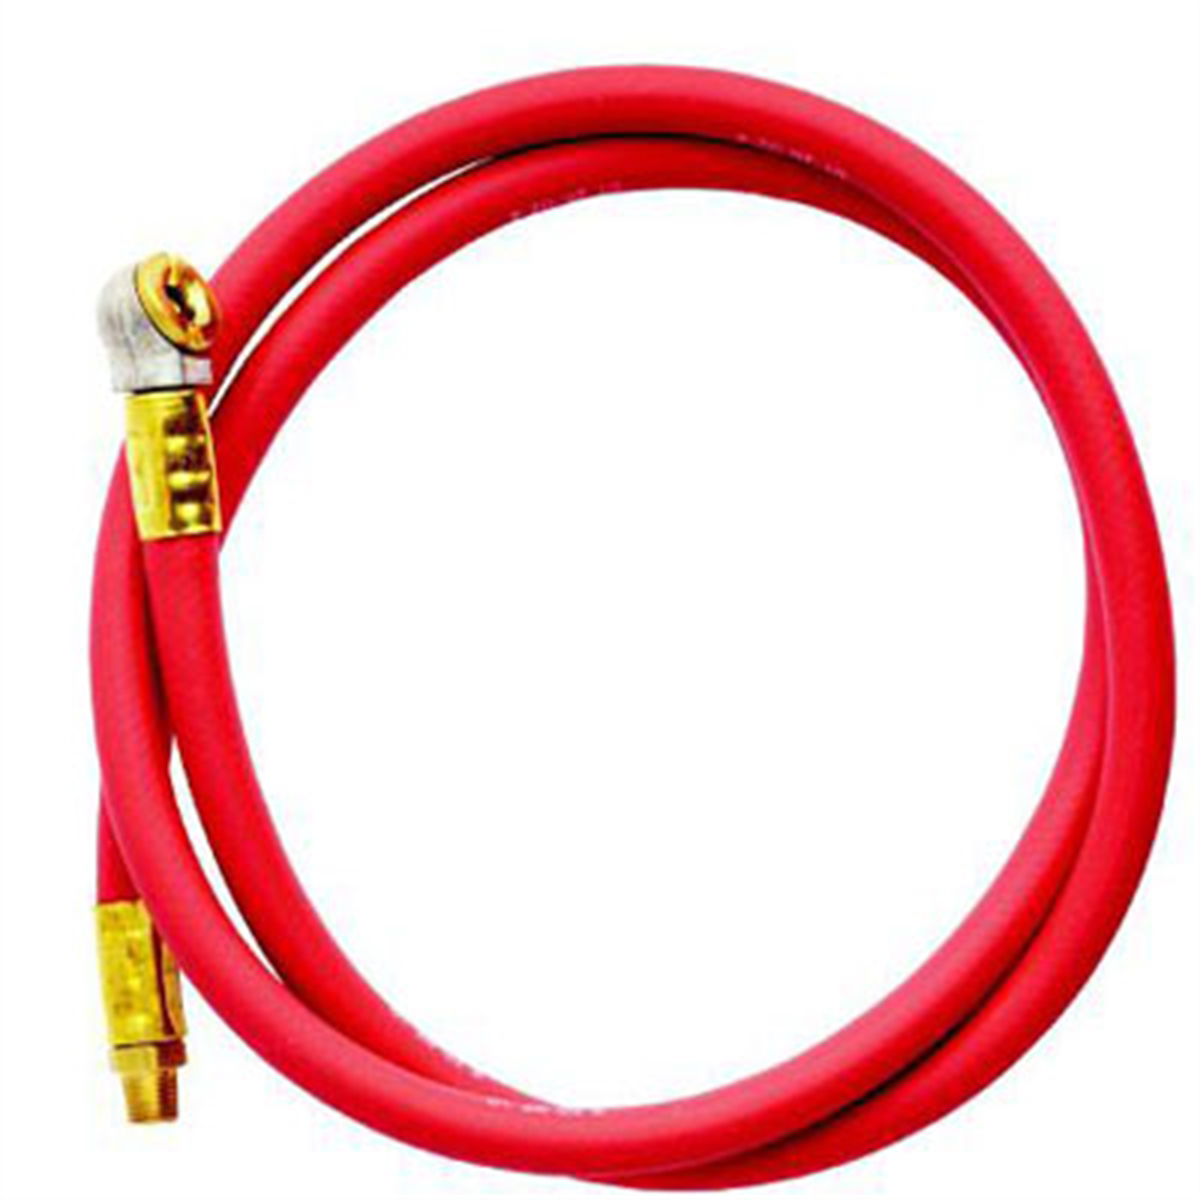 Replacement Hose Assembly - 4 Ft x 1/8 In NPT Male